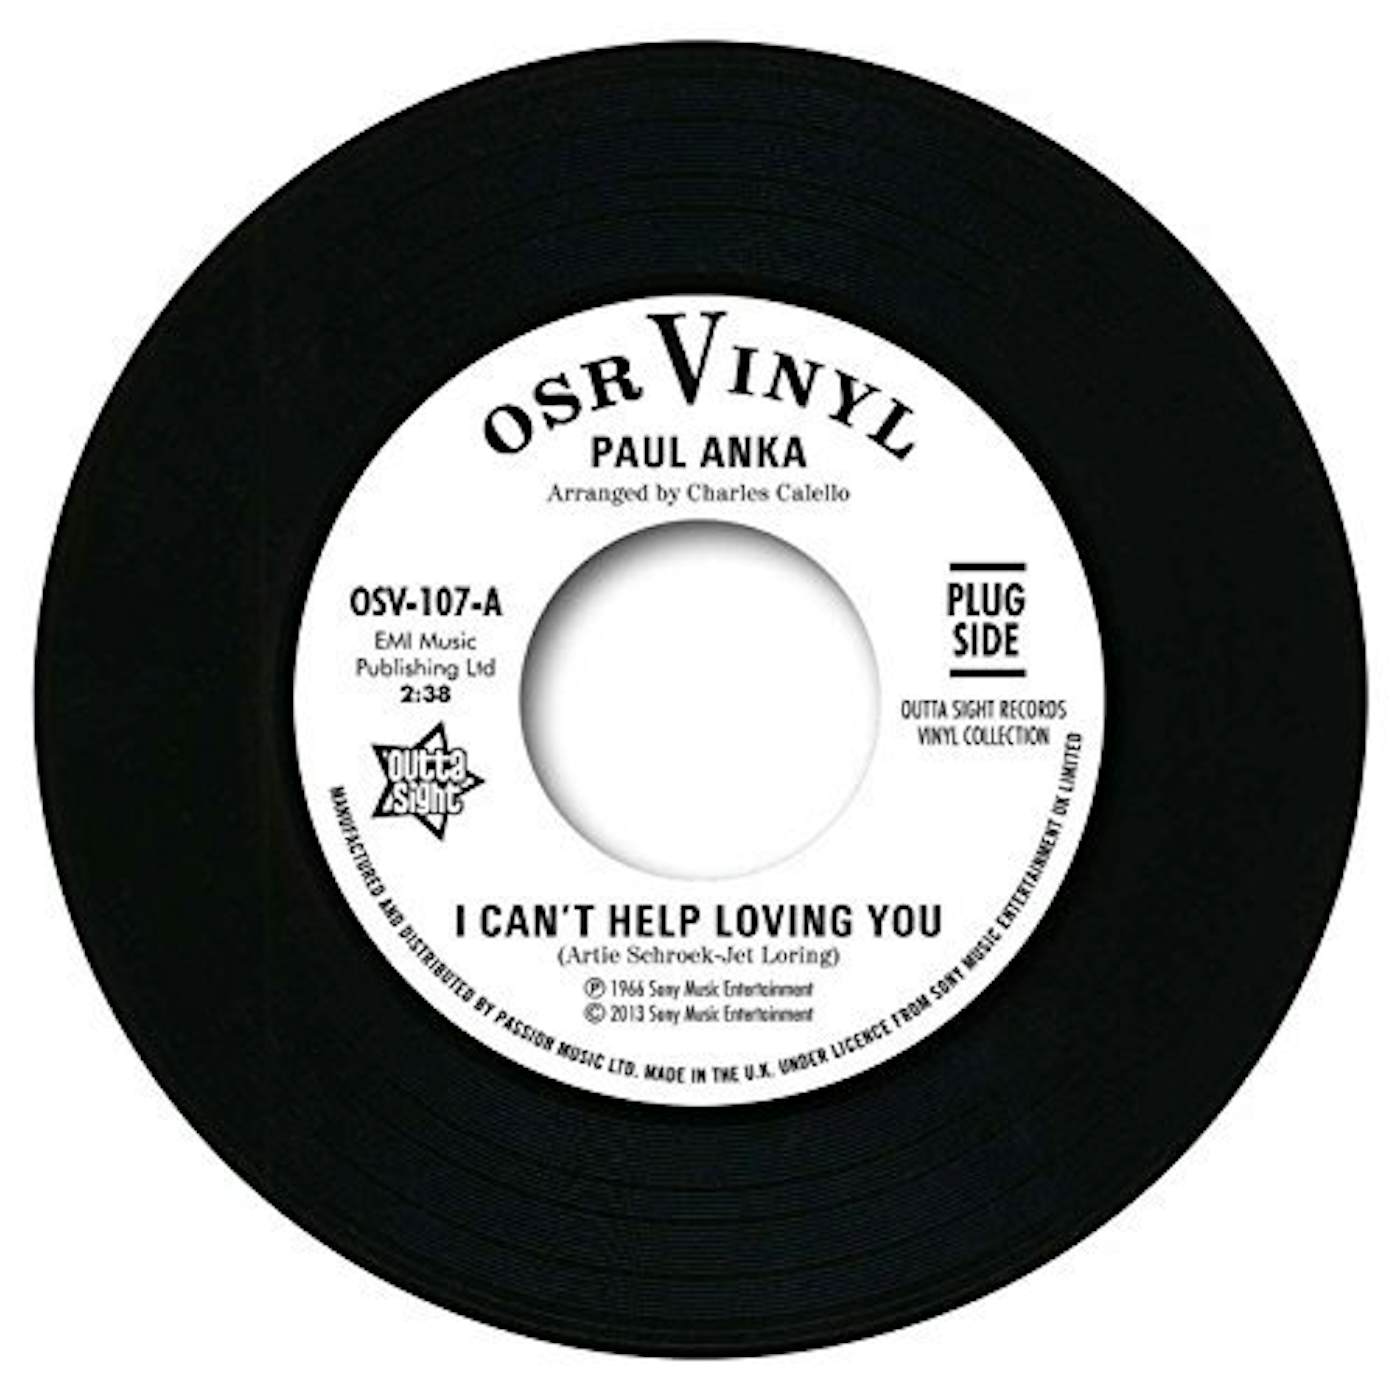 Paul Anka I CAN'T HELP LOVING YOU/WHEN WE GET THERE Vinyl Record